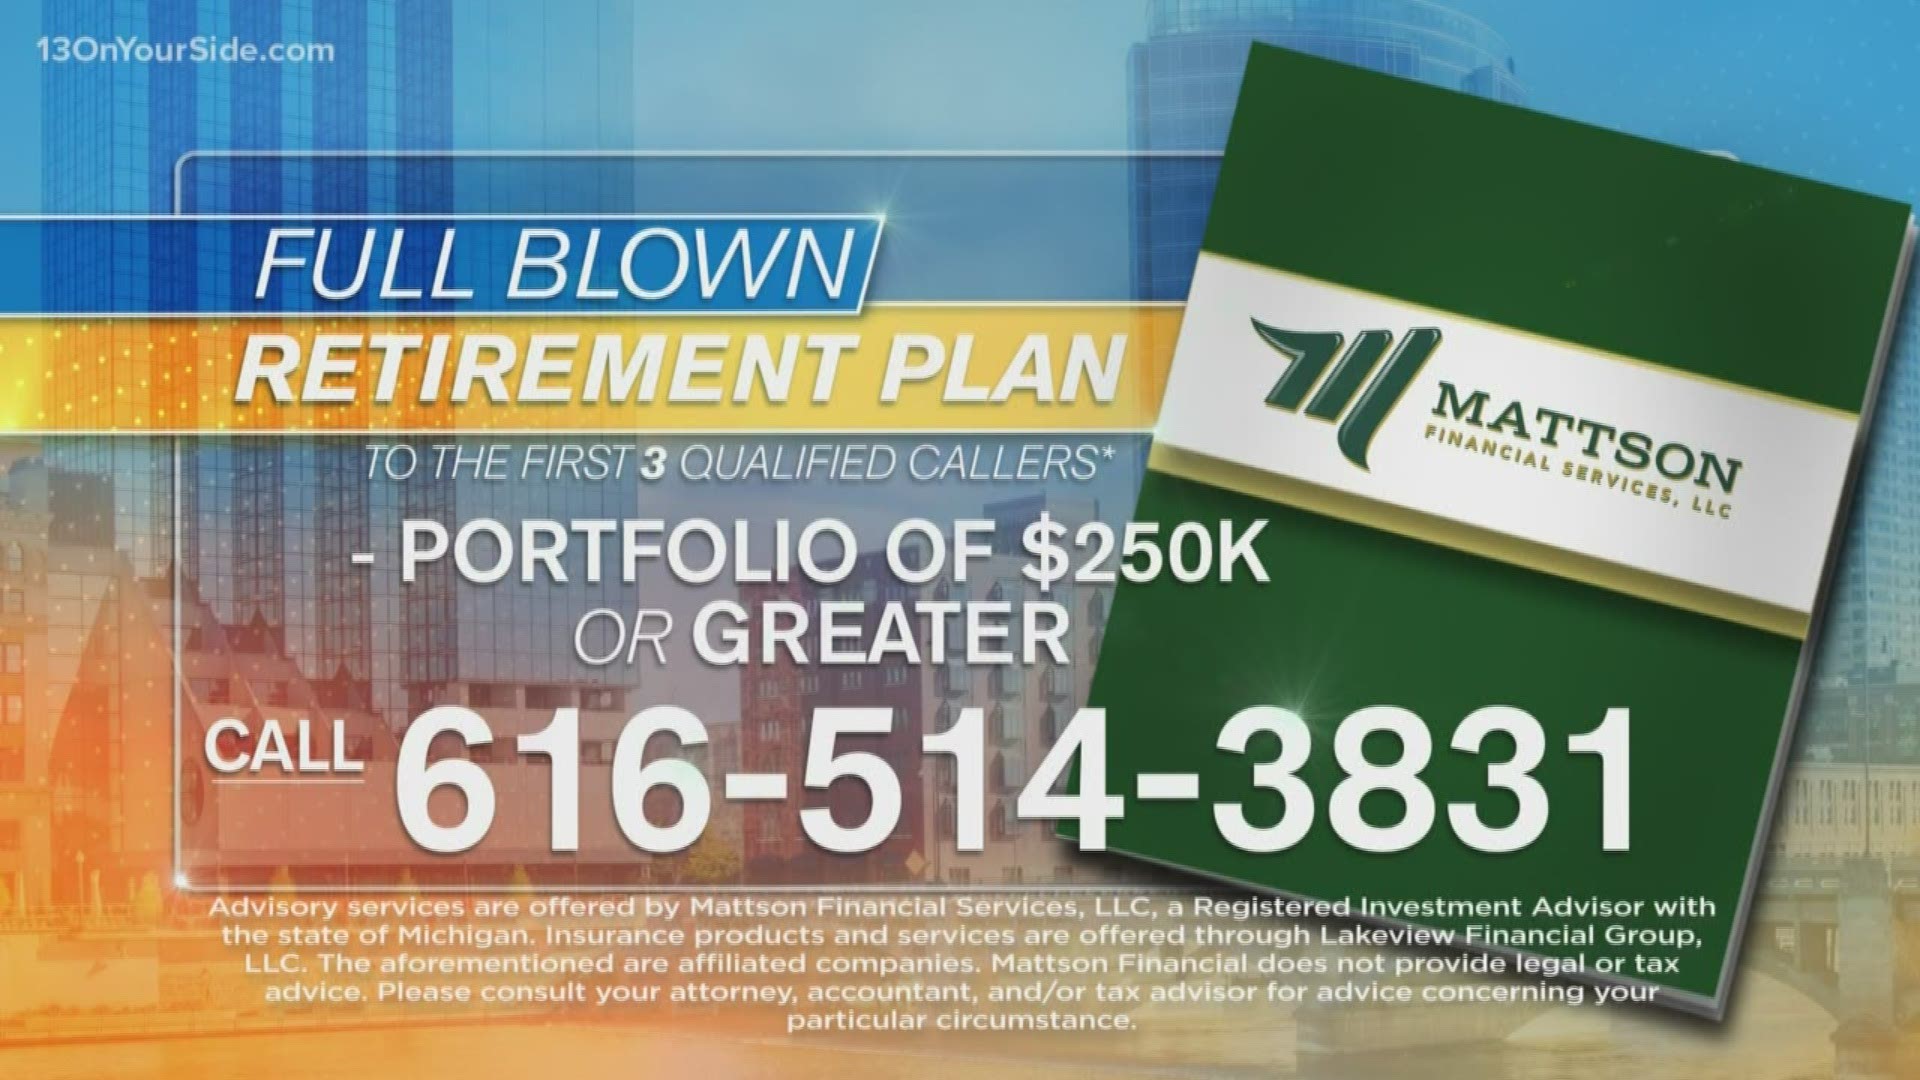 Here from our Money Mentors on how to keep your retirement rolling in the right direction.